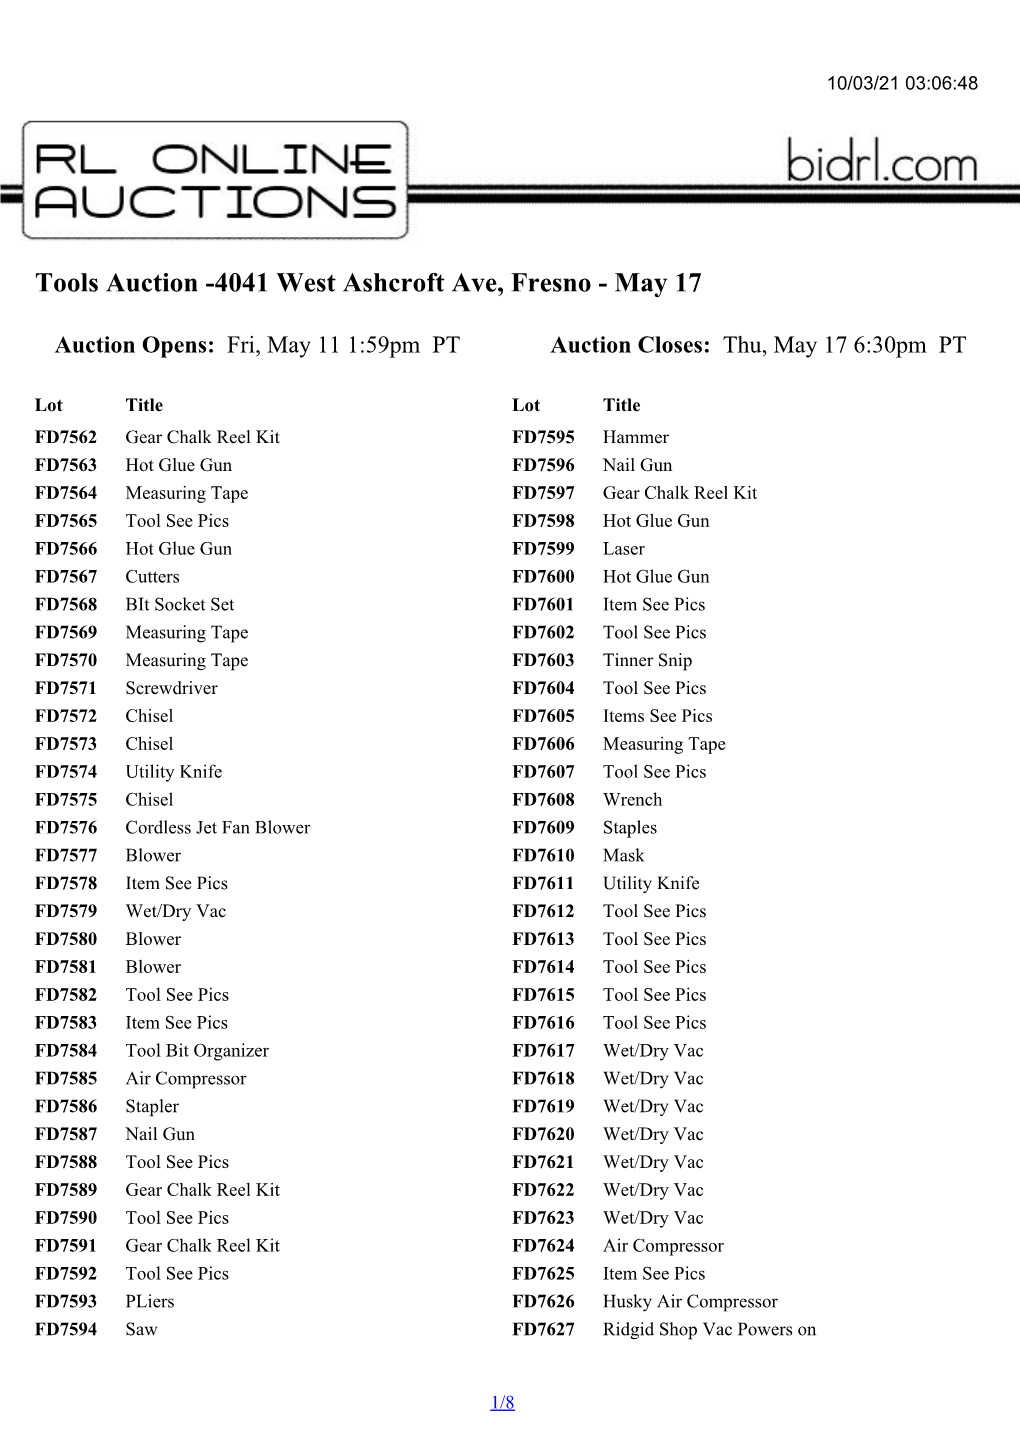 Tools Auction -4041 West Ashcroft Ave, Fresno - May 17